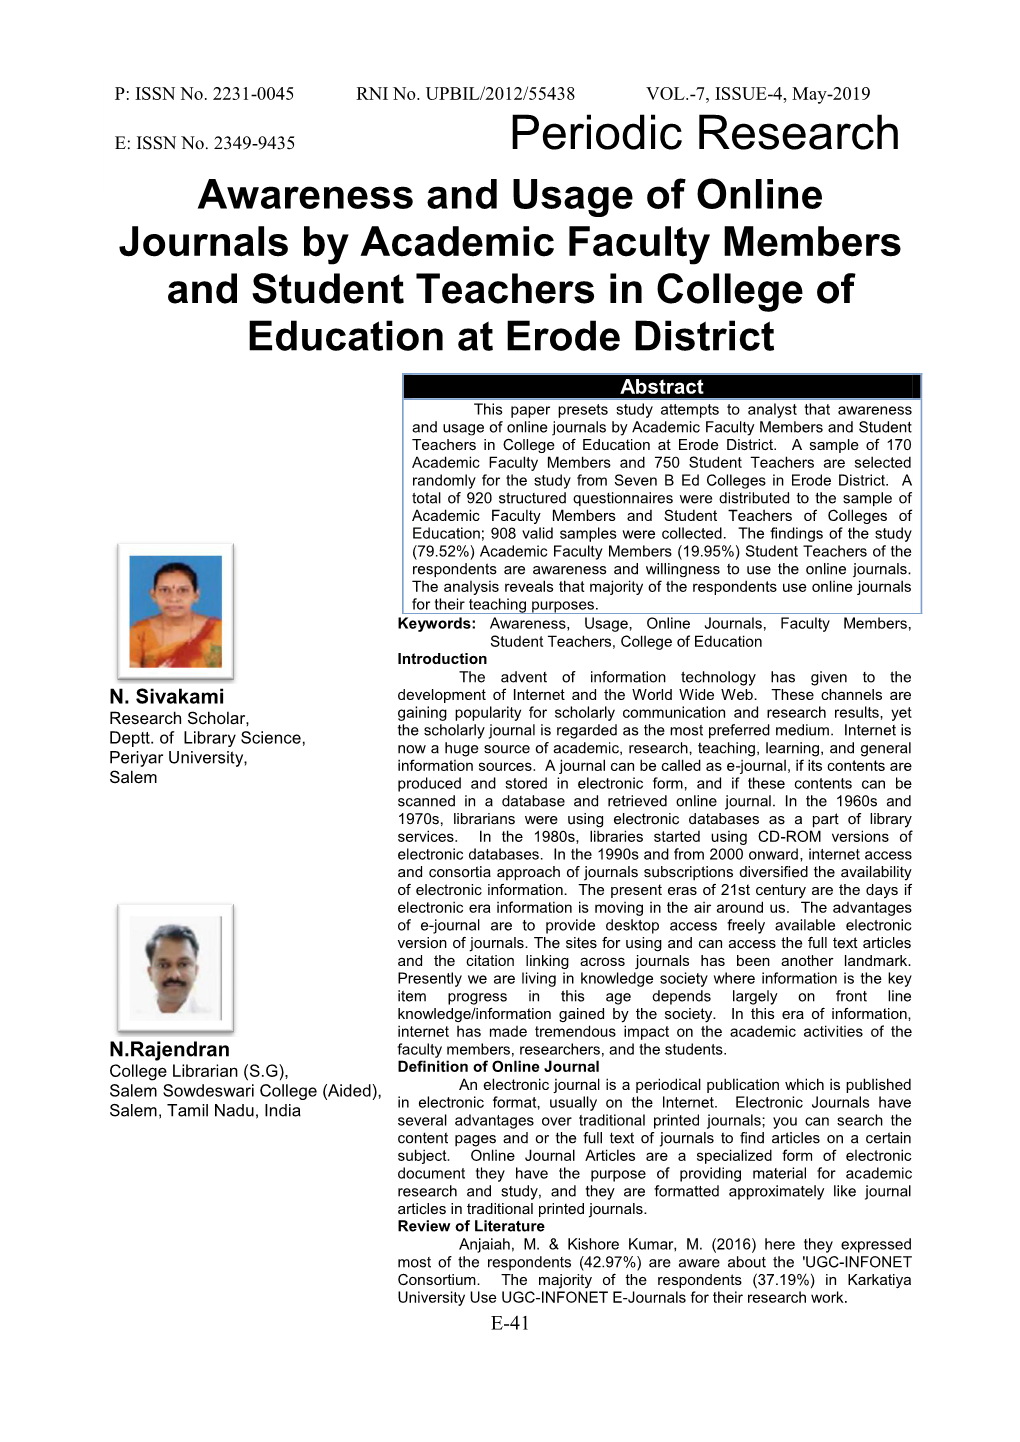 Awareness and Usage of Online Journals by Academic Faculty